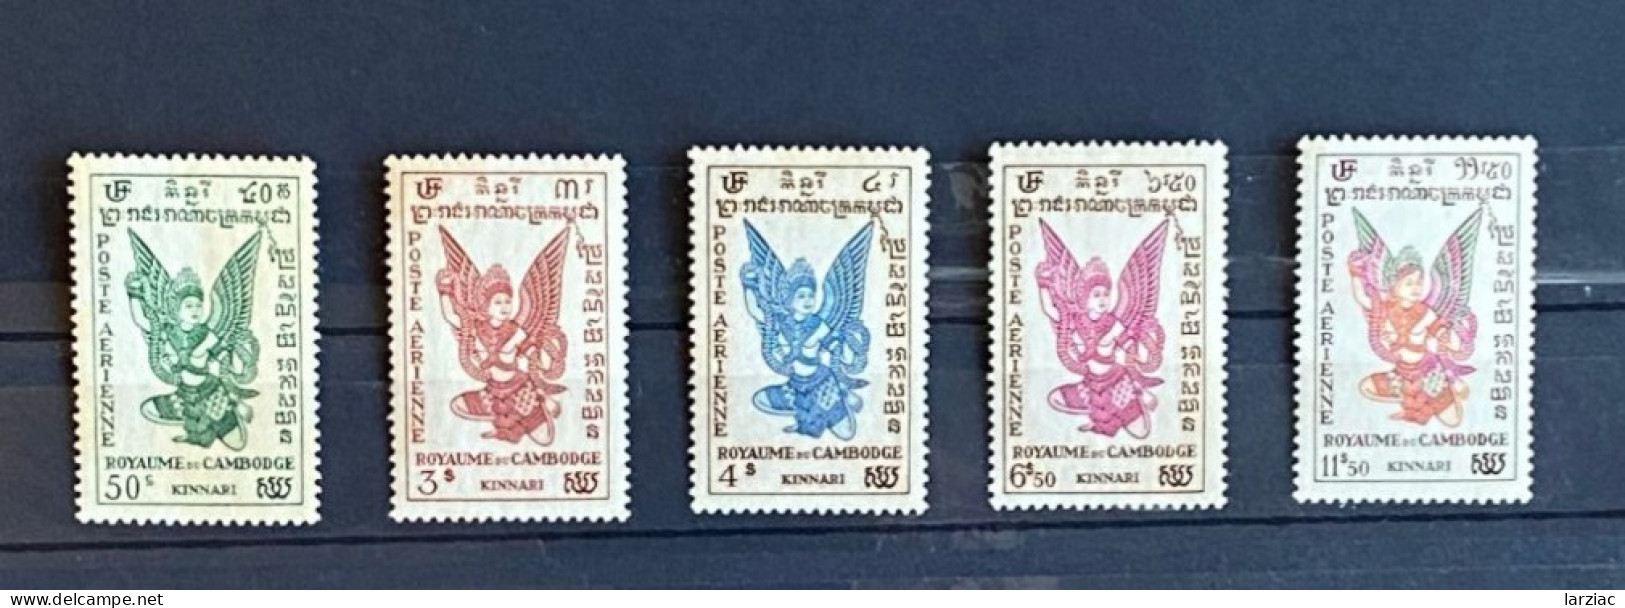 Timbres Cambodge PA N°1-2-4-6-8 Neufs - Cambodge